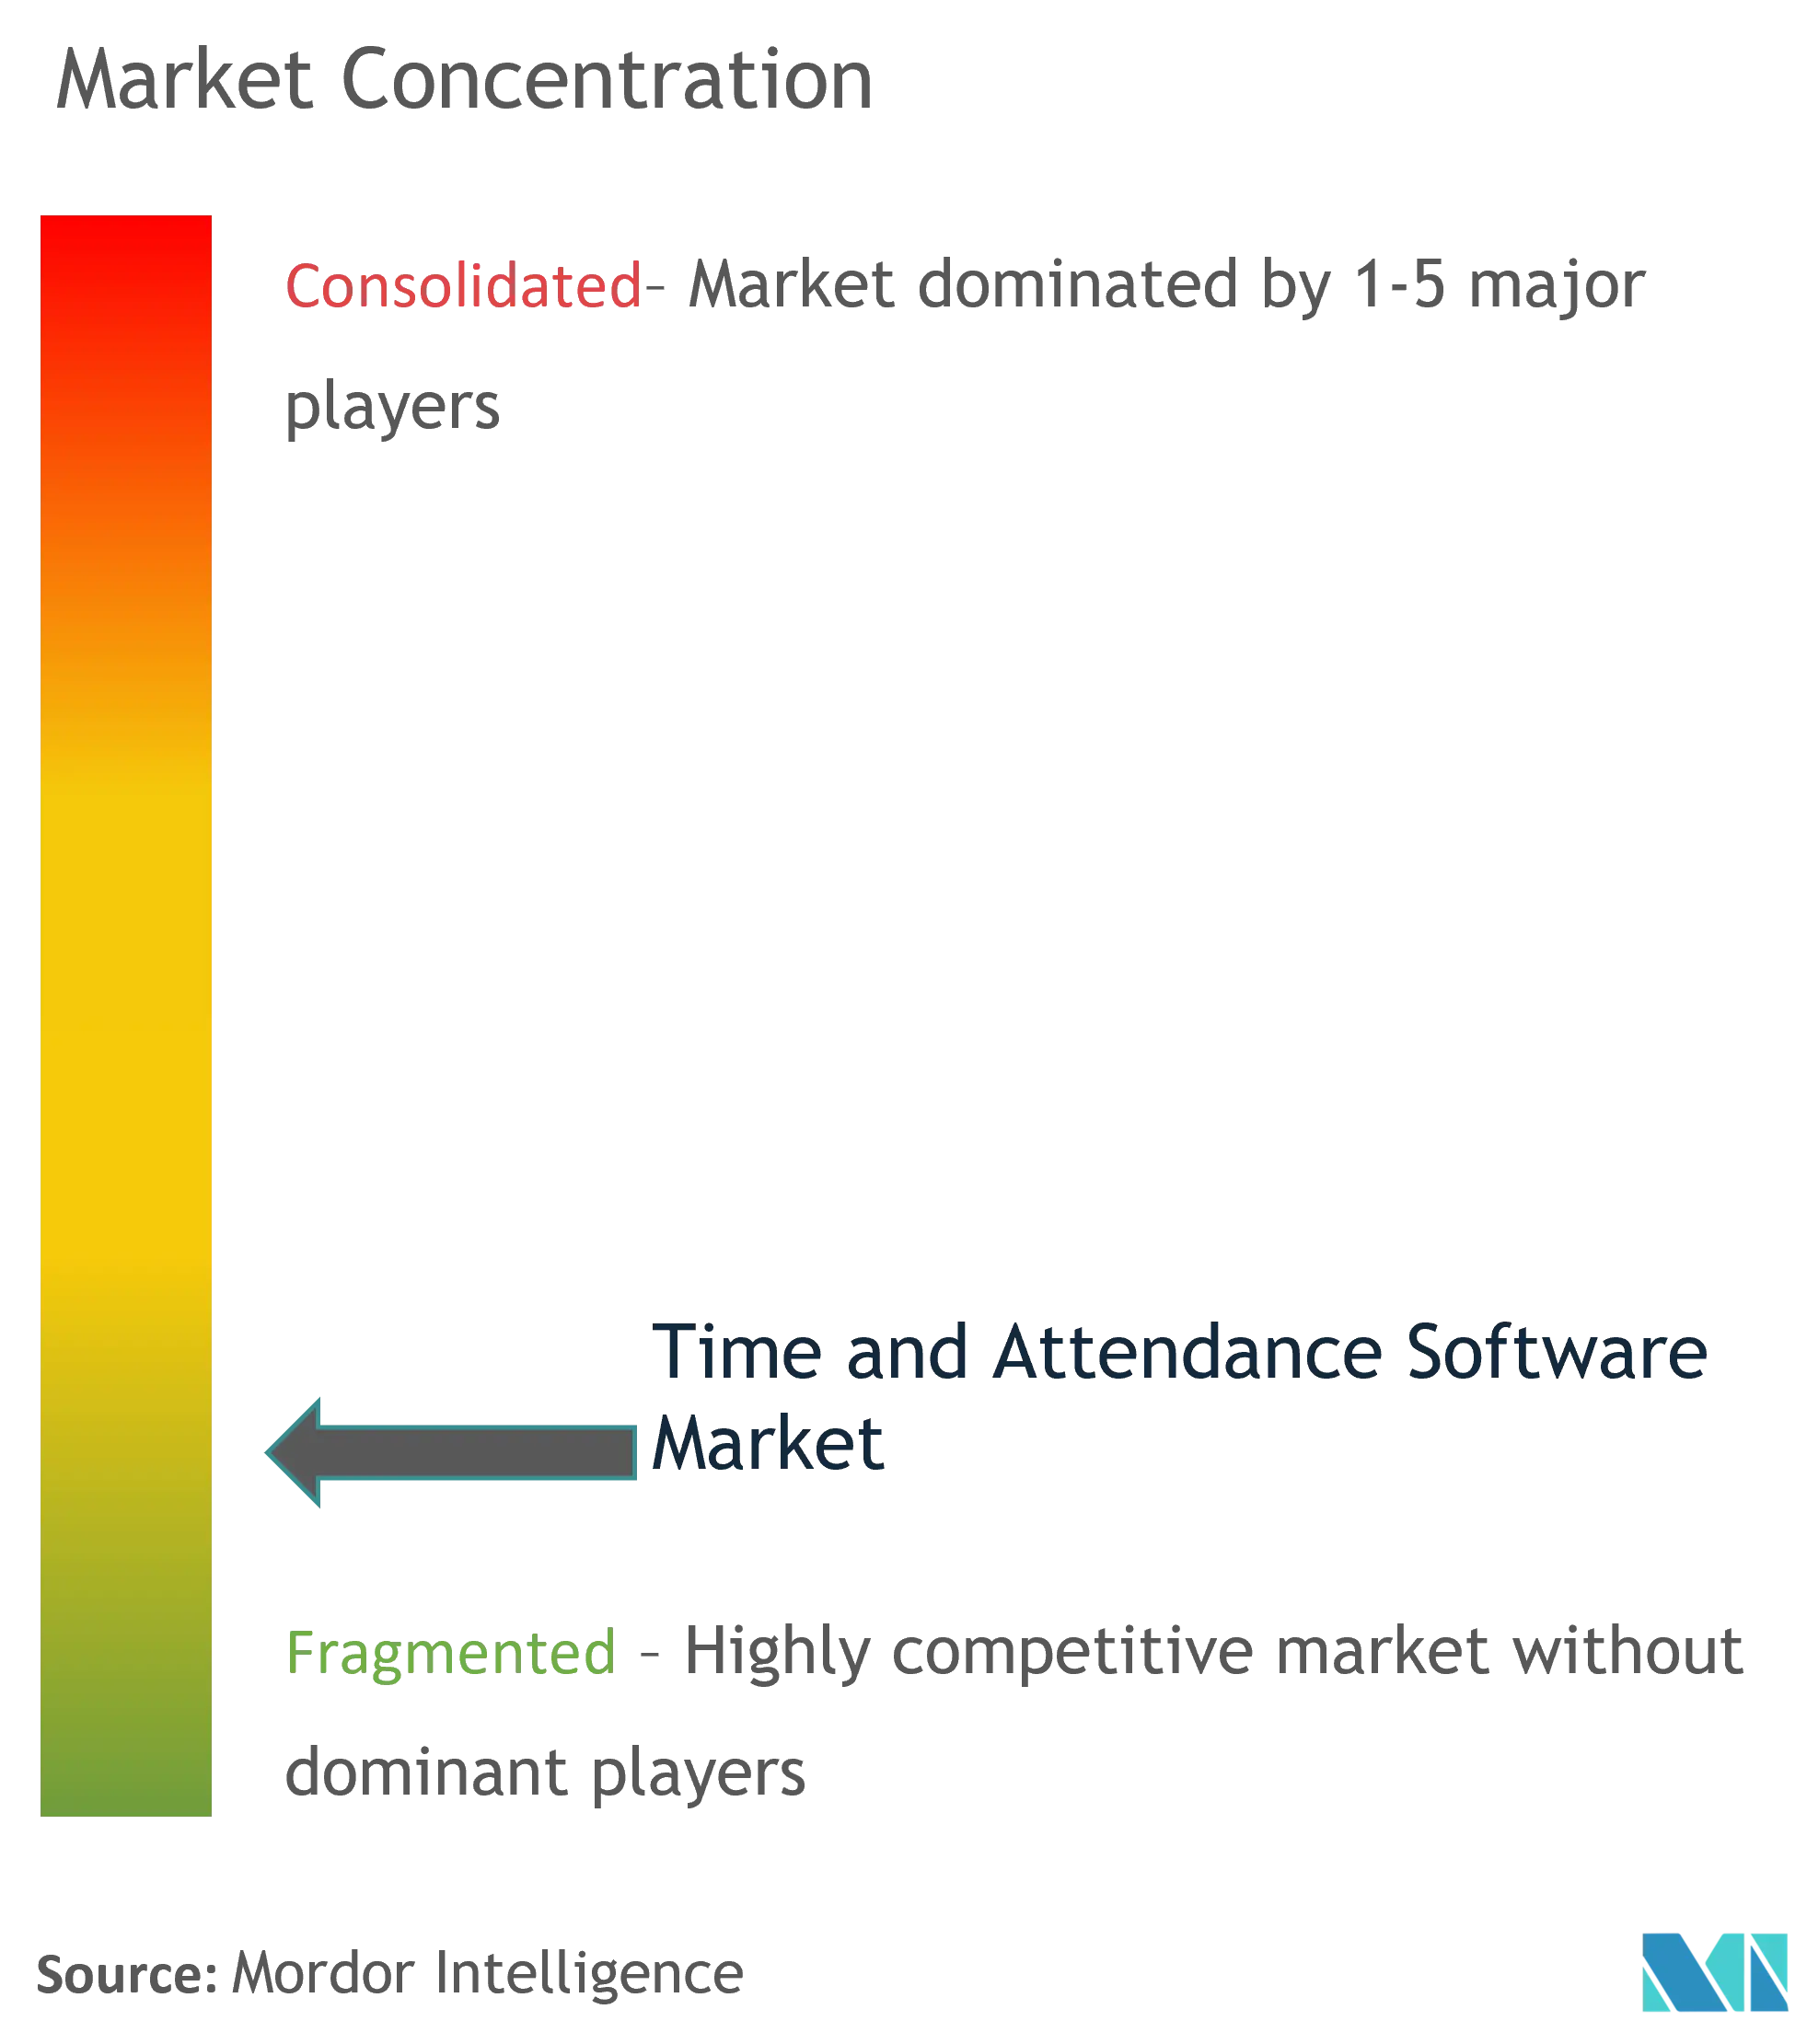 Time and Attendance Software Market Concentration